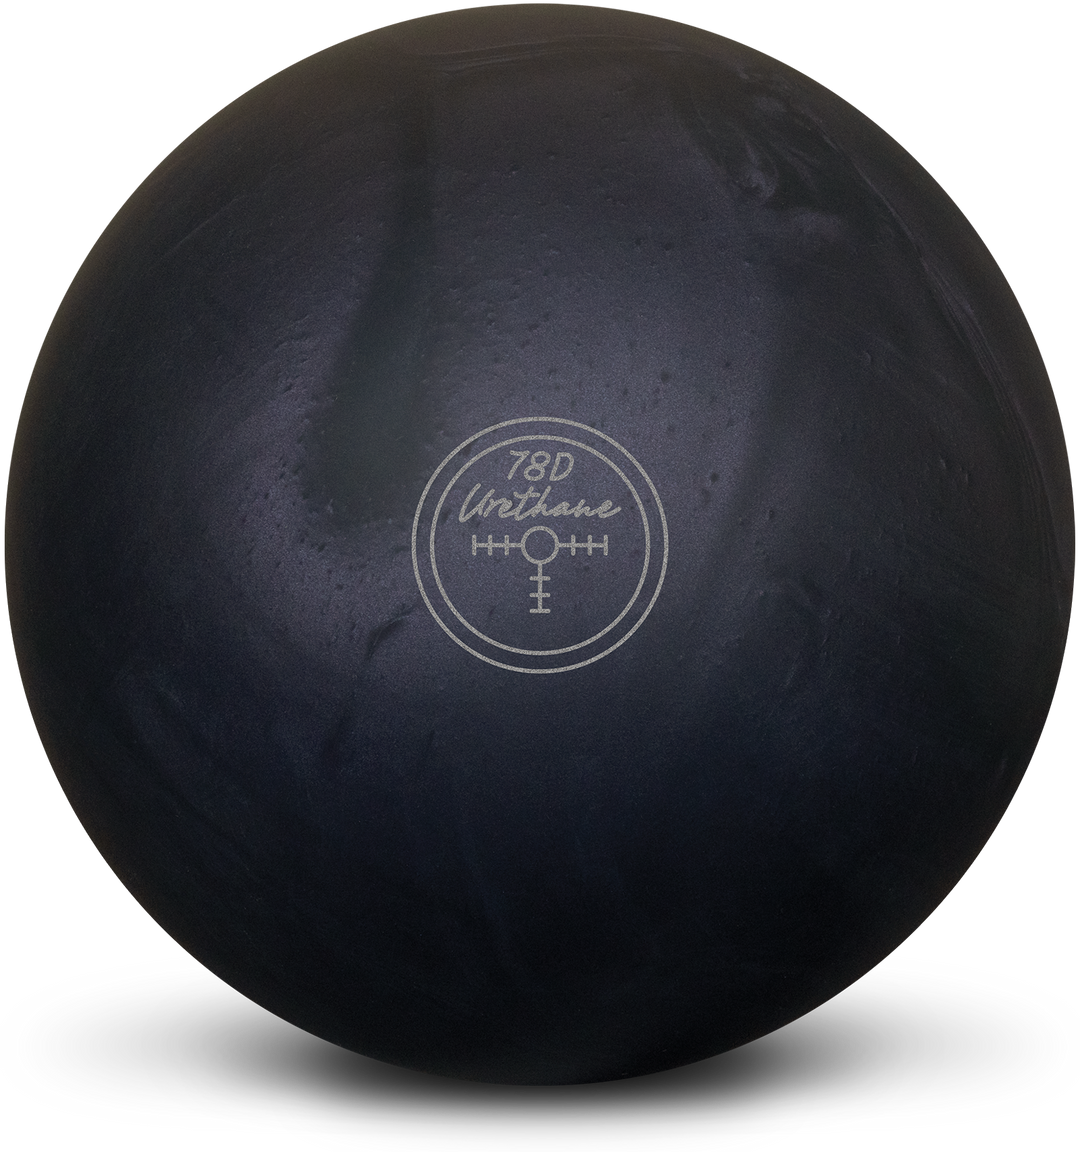 Black Pearl Urethane bowling ball showing the center of gravity marker